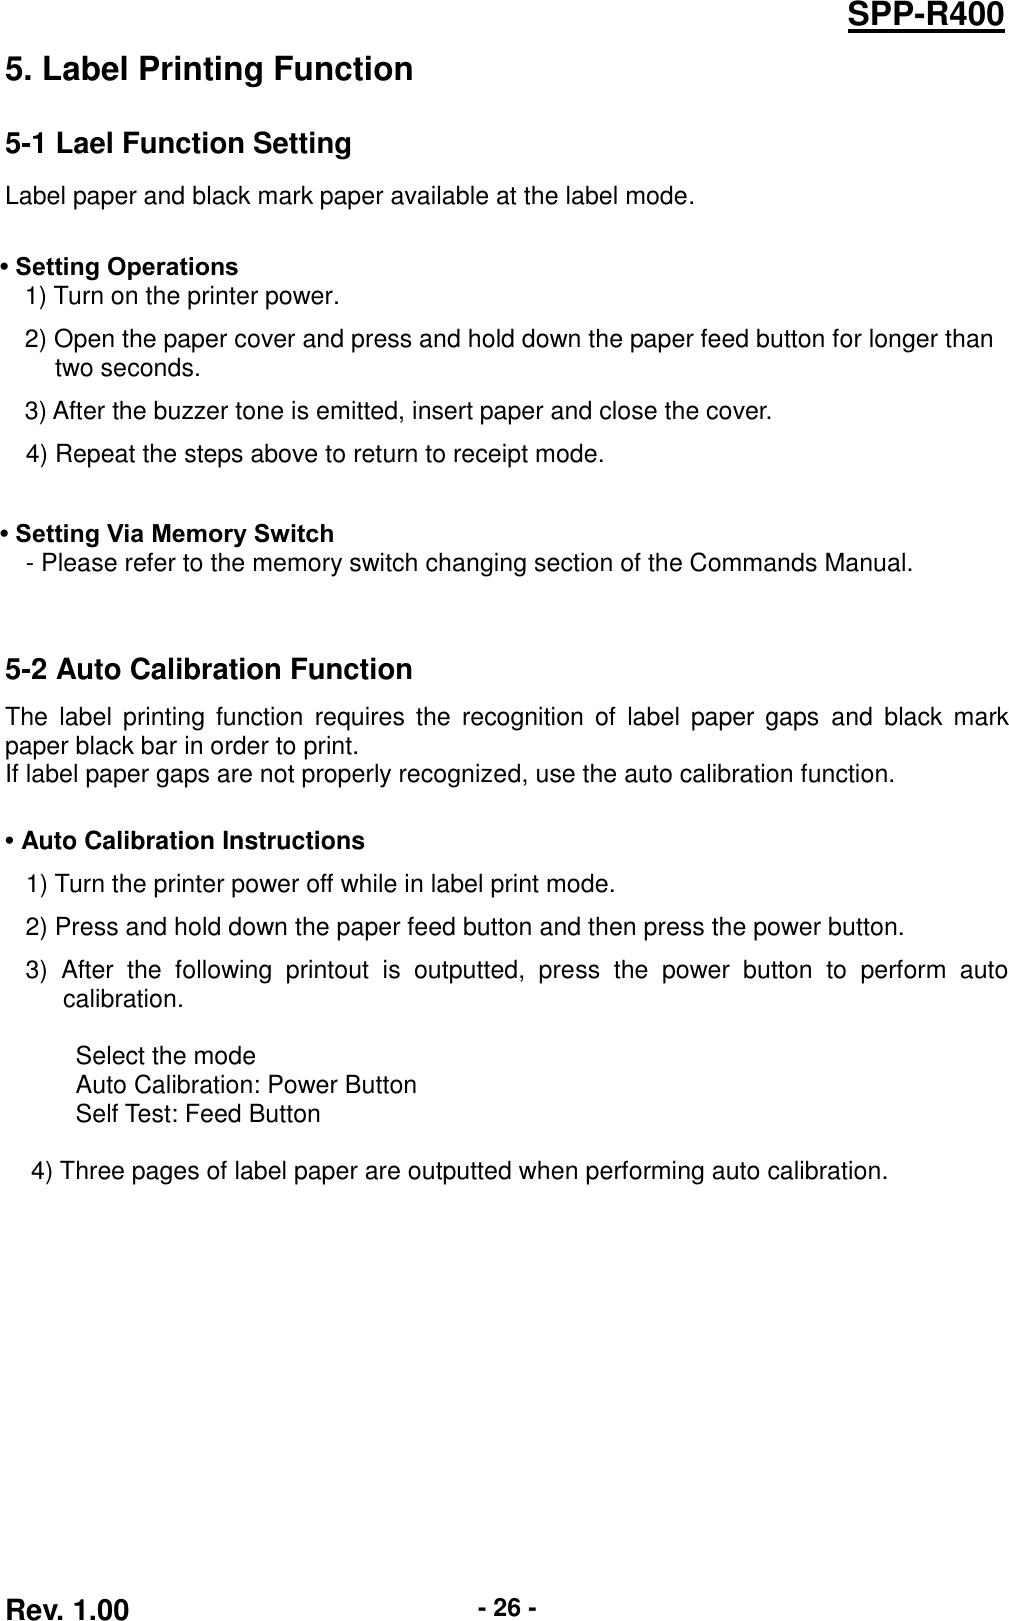  Rev. 1.00 - 26 - SPP-R400 5. Label Printing Function 5-1 Lael Function Setting Label paper and black mark paper available at the label mode.  • Setting Operations 1) Turn on the printer power. 2) Open the paper cover and press and hold down the paper feed button for longer than   two seconds. 3) After the buzzer tone is emitted, insert paper and close the cover. 4) Repeat the steps above to return to receipt mode.    • Setting Via Memory Switch - Please refer to the memory switch changing section of the Commands Manual.   5-2 Auto Calibration Function The  label  printing function  requires  the  recognition of  label  paper  gaps  and  black mark paper black bar in order to print. If label paper gaps are not properly recognized, use the auto calibration function.  • Auto Calibration Instructions 1) Turn the printer power off while in label print mode. 2) Press and hold down the paper feed button and then press the power button. 3)  After  the  following  printout  is  outputted,  press  the  power  button  to  perform  auto calibration.  Select the mode Auto Calibration: Power Button Self Test: Feed Button    4) Three pages of label paper are outputted when performing auto calibration.  